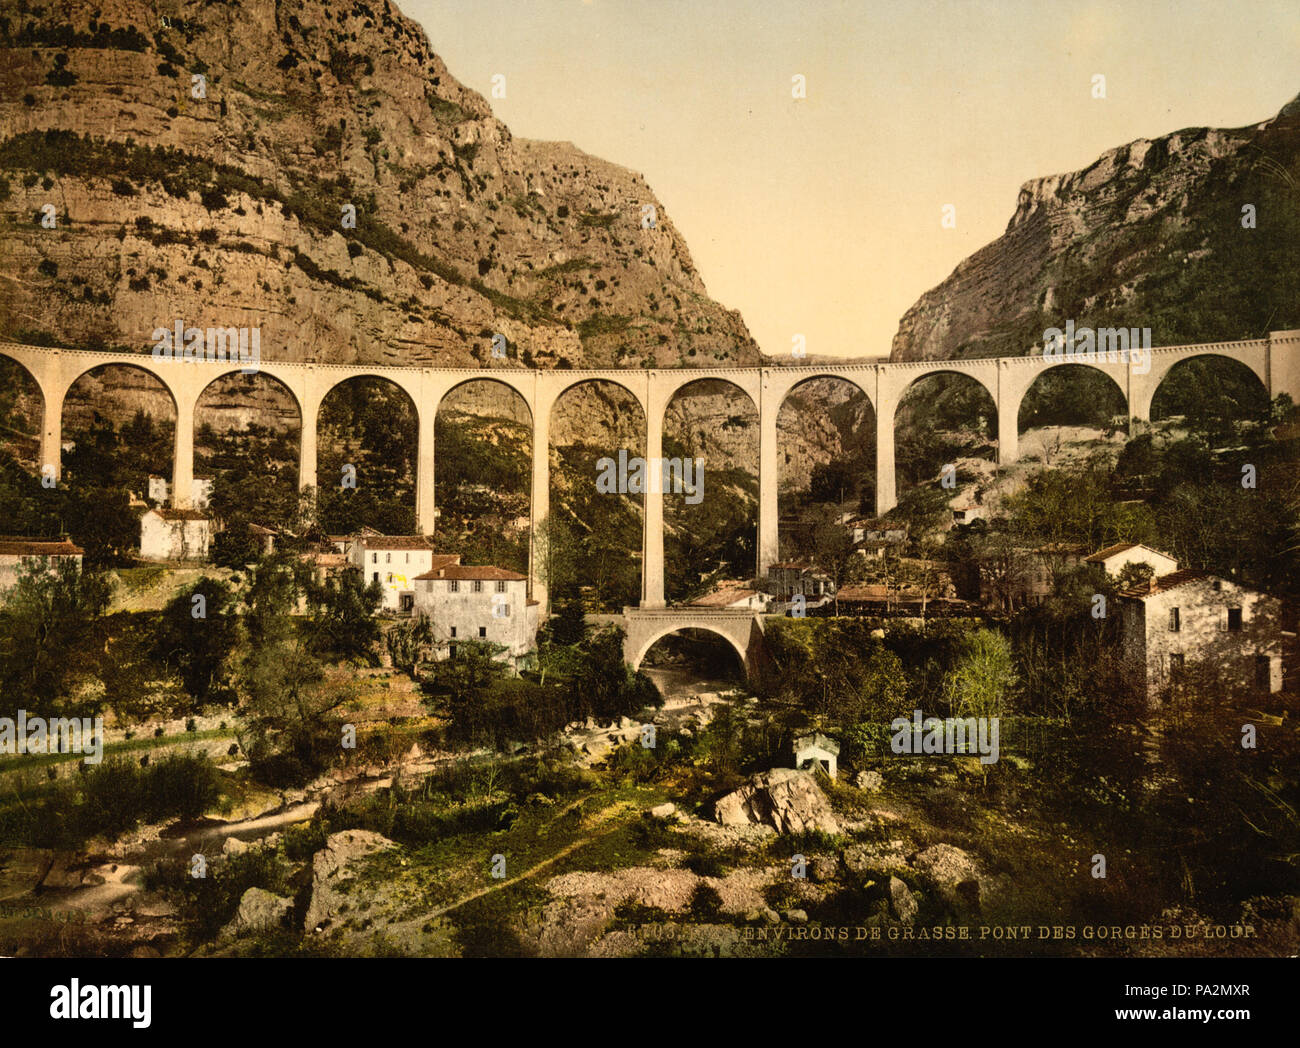 . English: Old Central Railway Var. Bridge was destroyed by retreating German troops when on August 24, 1944. Only the pillars remain. Français : Seules, les piles de l'ouvrage subsistent aujourd'hui. between 1890 and 1905 721 Gourdon, bridge over Gorges de Loup, Grasse, France, ca. 1895 Stock Photo